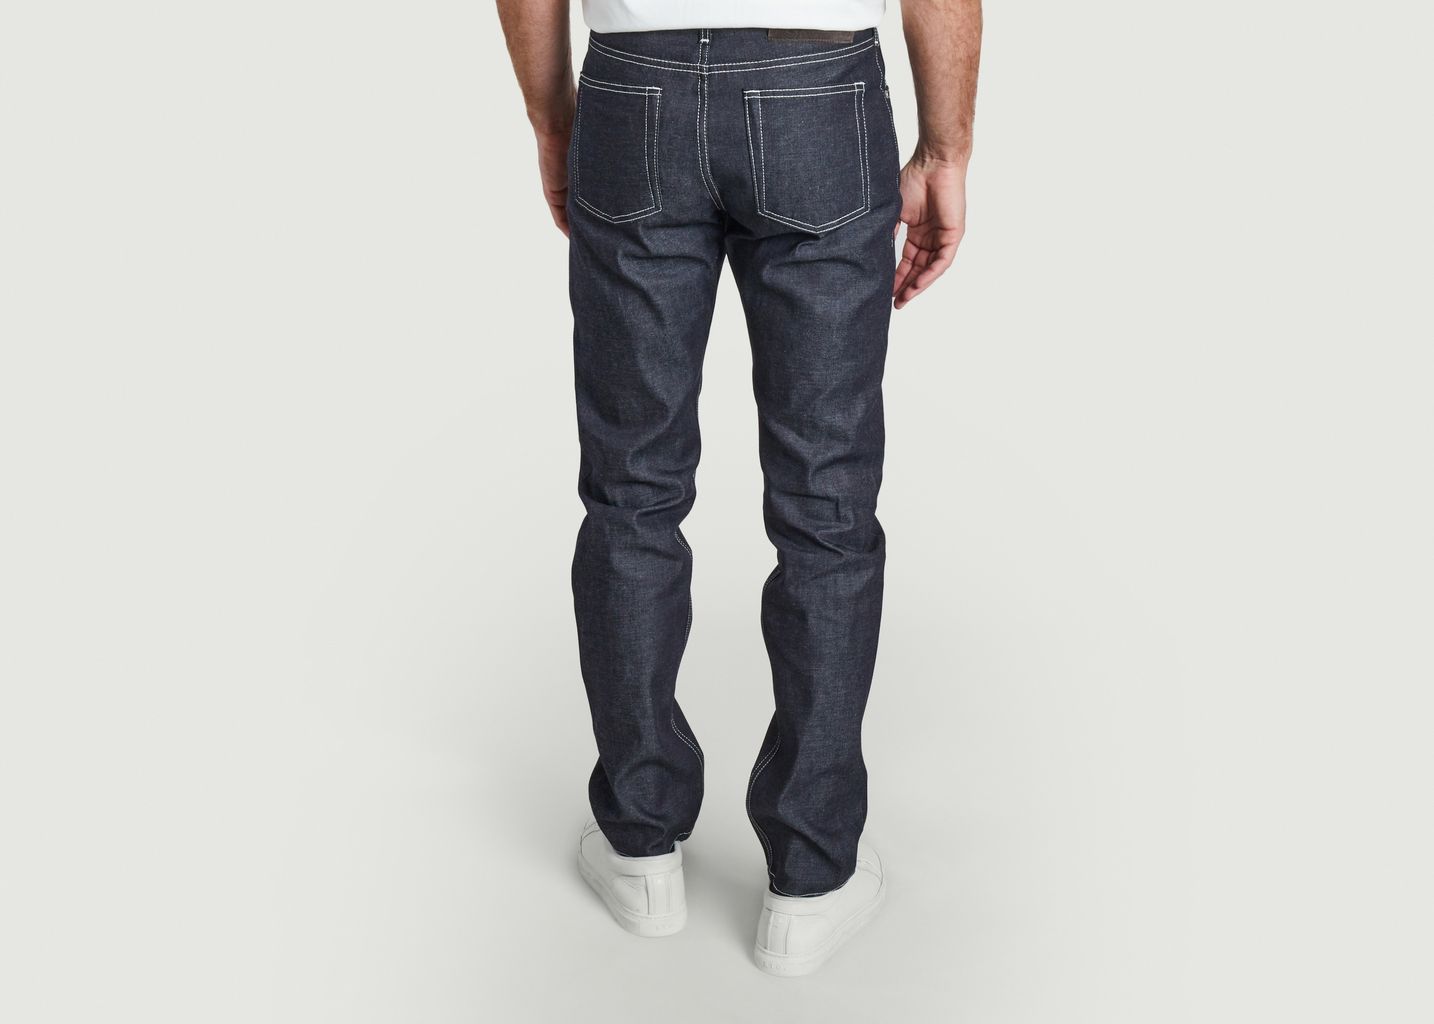 Weid Guy - Blue Jay Selvedge - Naked and Famous